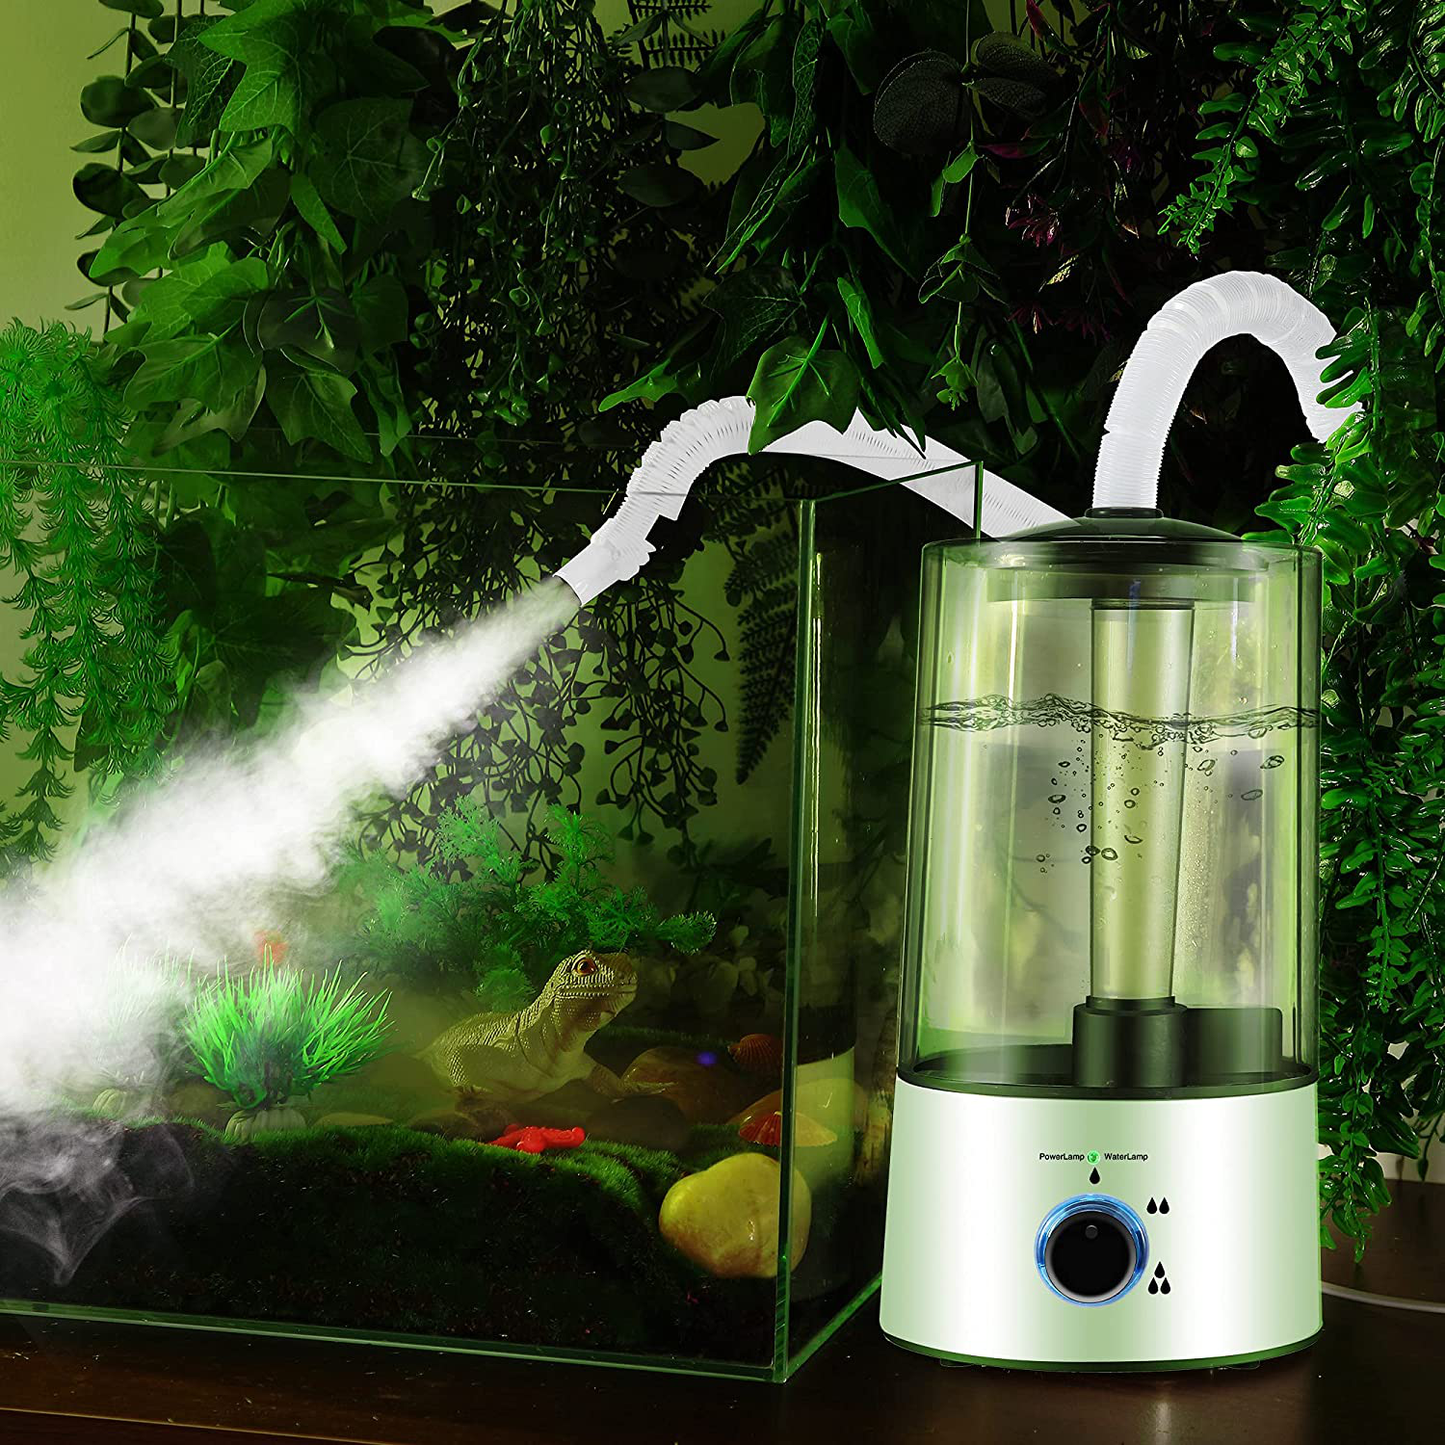 Dreyoo Reptile Humidifier Fogger, 4L Cool Mist Fog Mister with Tube for Tortoise Habitat Chameleon Snake Amphibians, Compatible with All Terrariums, Cages and Enclosures Animals & Pet Supplies > Pet Supplies > Reptile & Amphibian Supplies > Reptile & Amphibian Habitat Accessories Dreyoo   